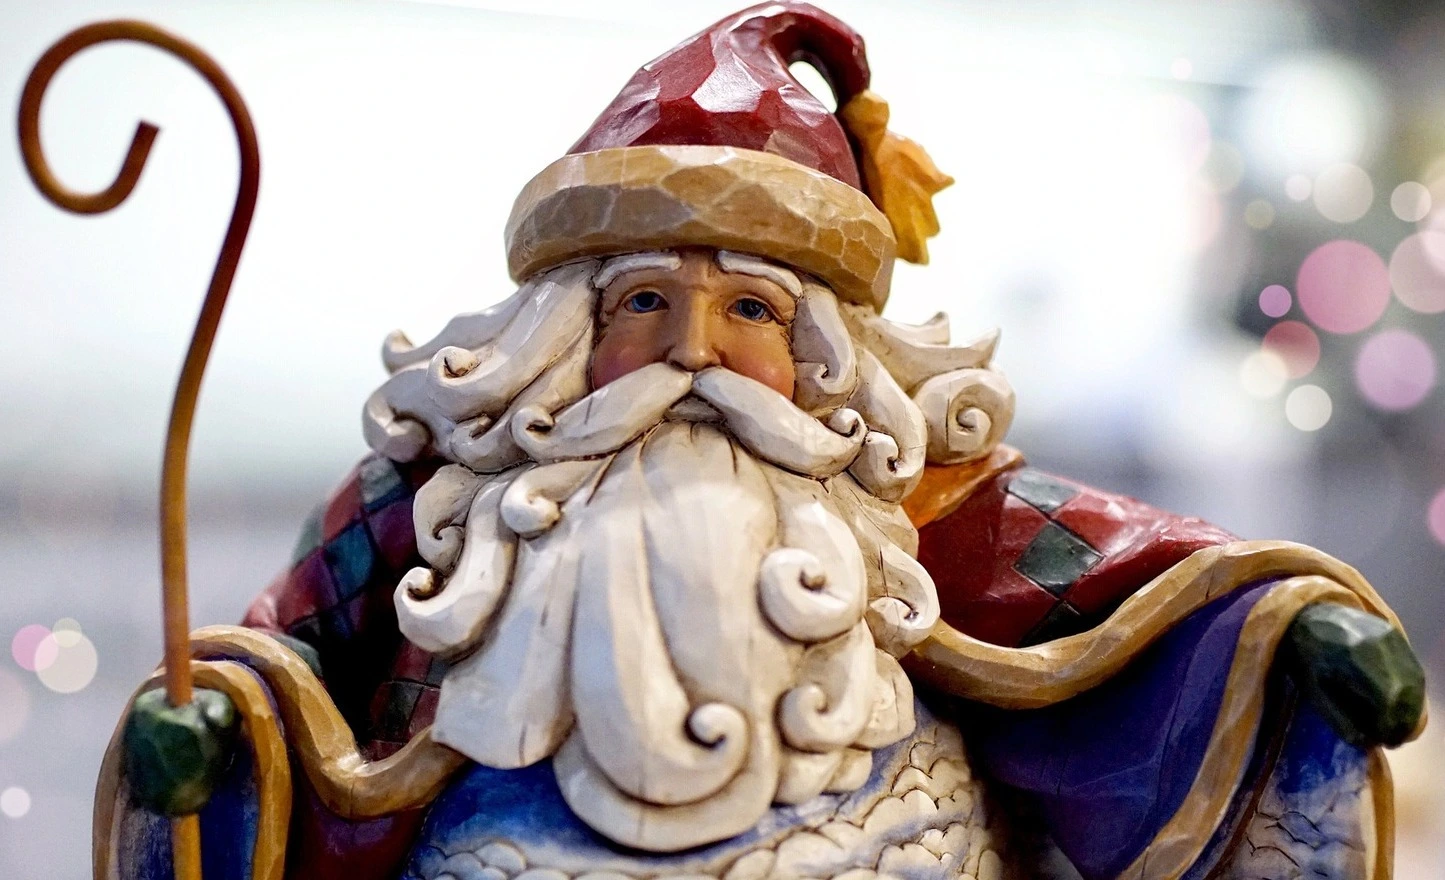 December 6, St. Nicholas Day - Traditions From Around the World